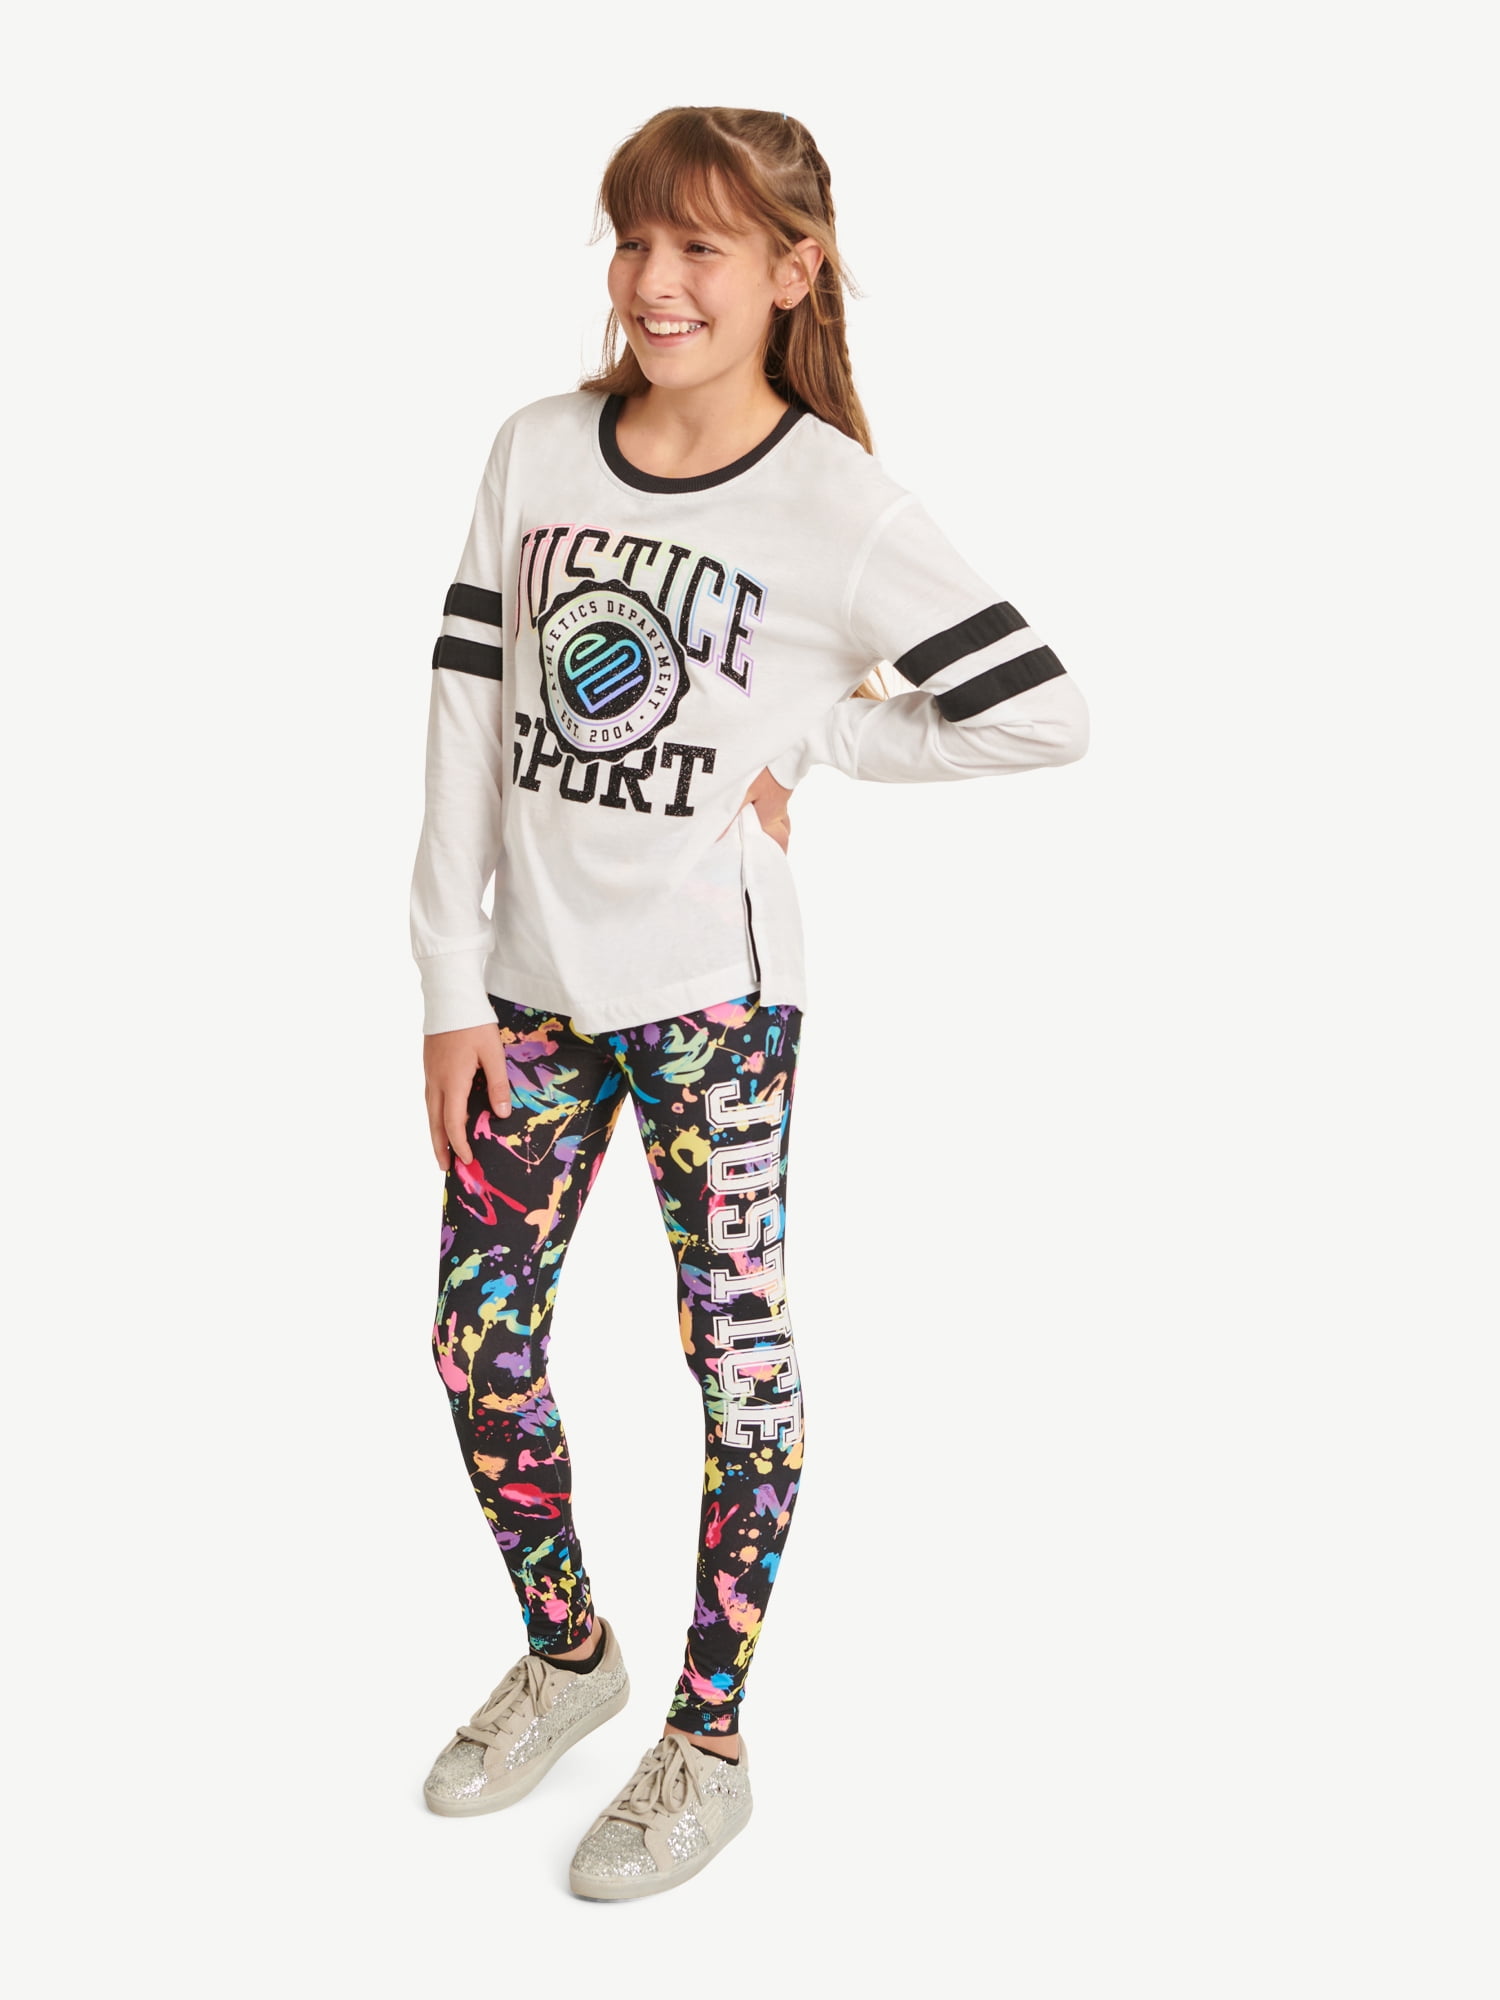 Justice Girls Holiday Gifting Graphic Long Sleeve T-Shirt & Legging 2-Piece  Outfit Set, Sizes XS-XLP 